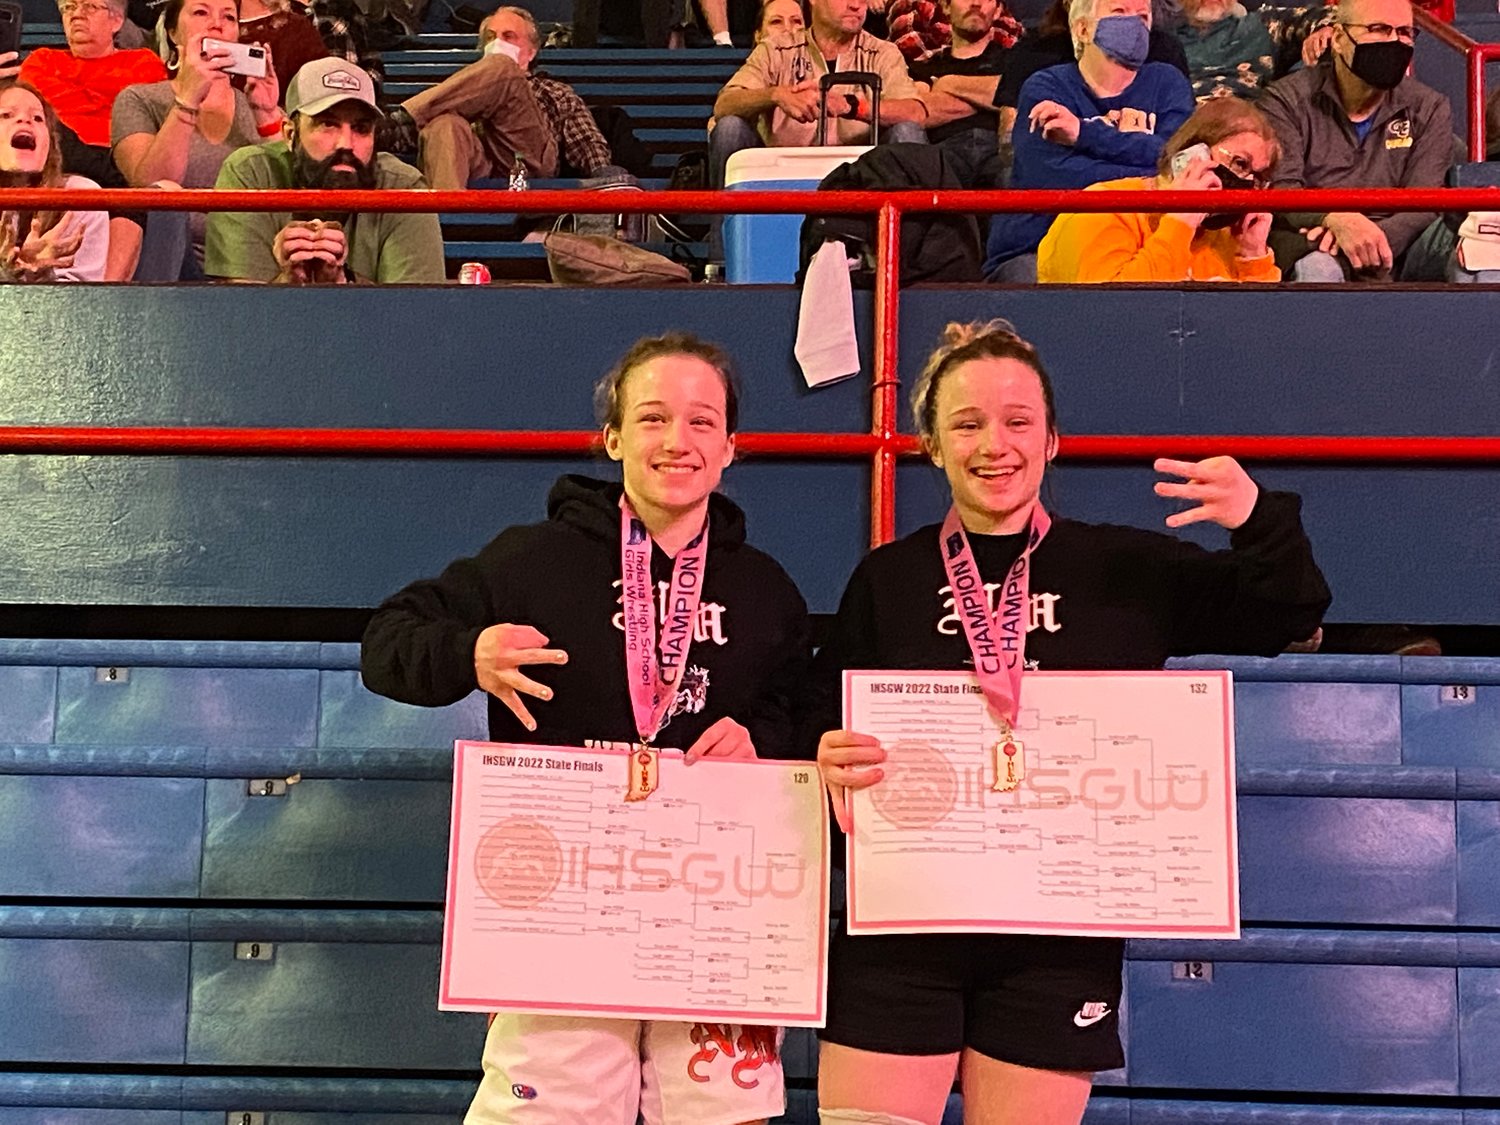 Senior twin sisters Catie (left) and Cailin (right) celebrate their state championships together on the podium at the Girls State Wrestling Finals in Kokomo. The sister duo has each won three state titles to cap off a stellar career.